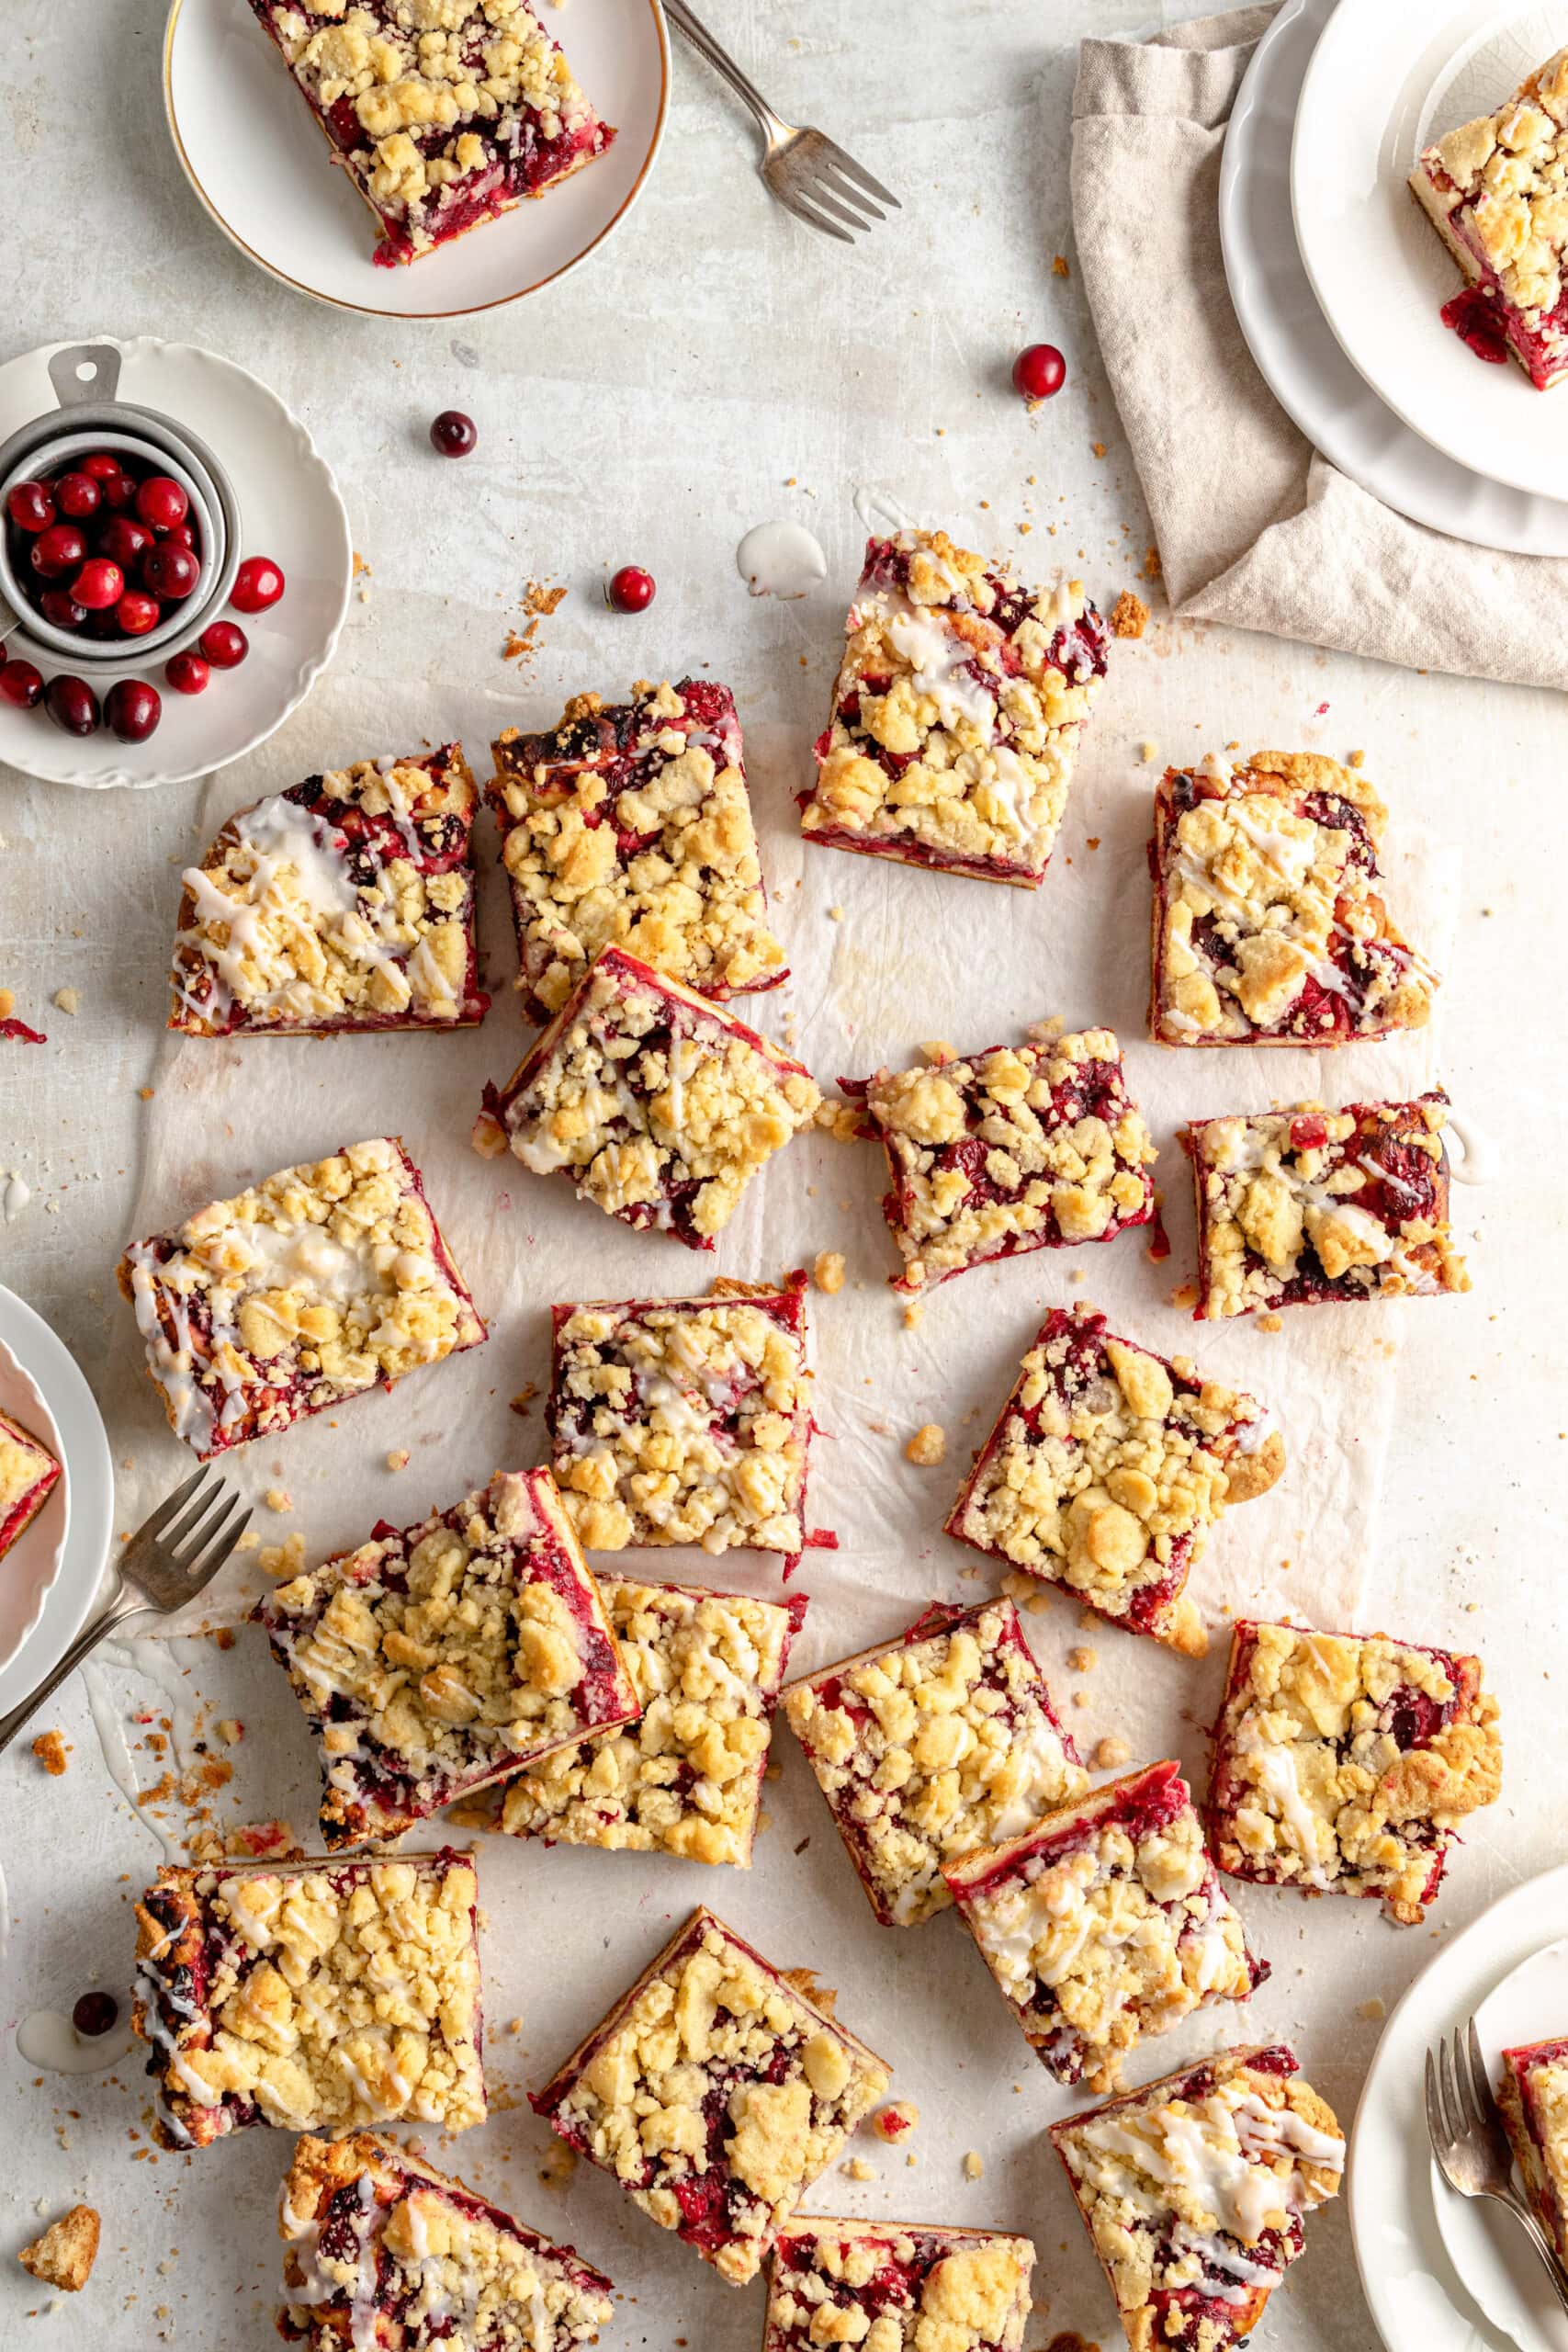 Overhead image of Cranberry Streuselkuchen cut into squares on parchment paper.